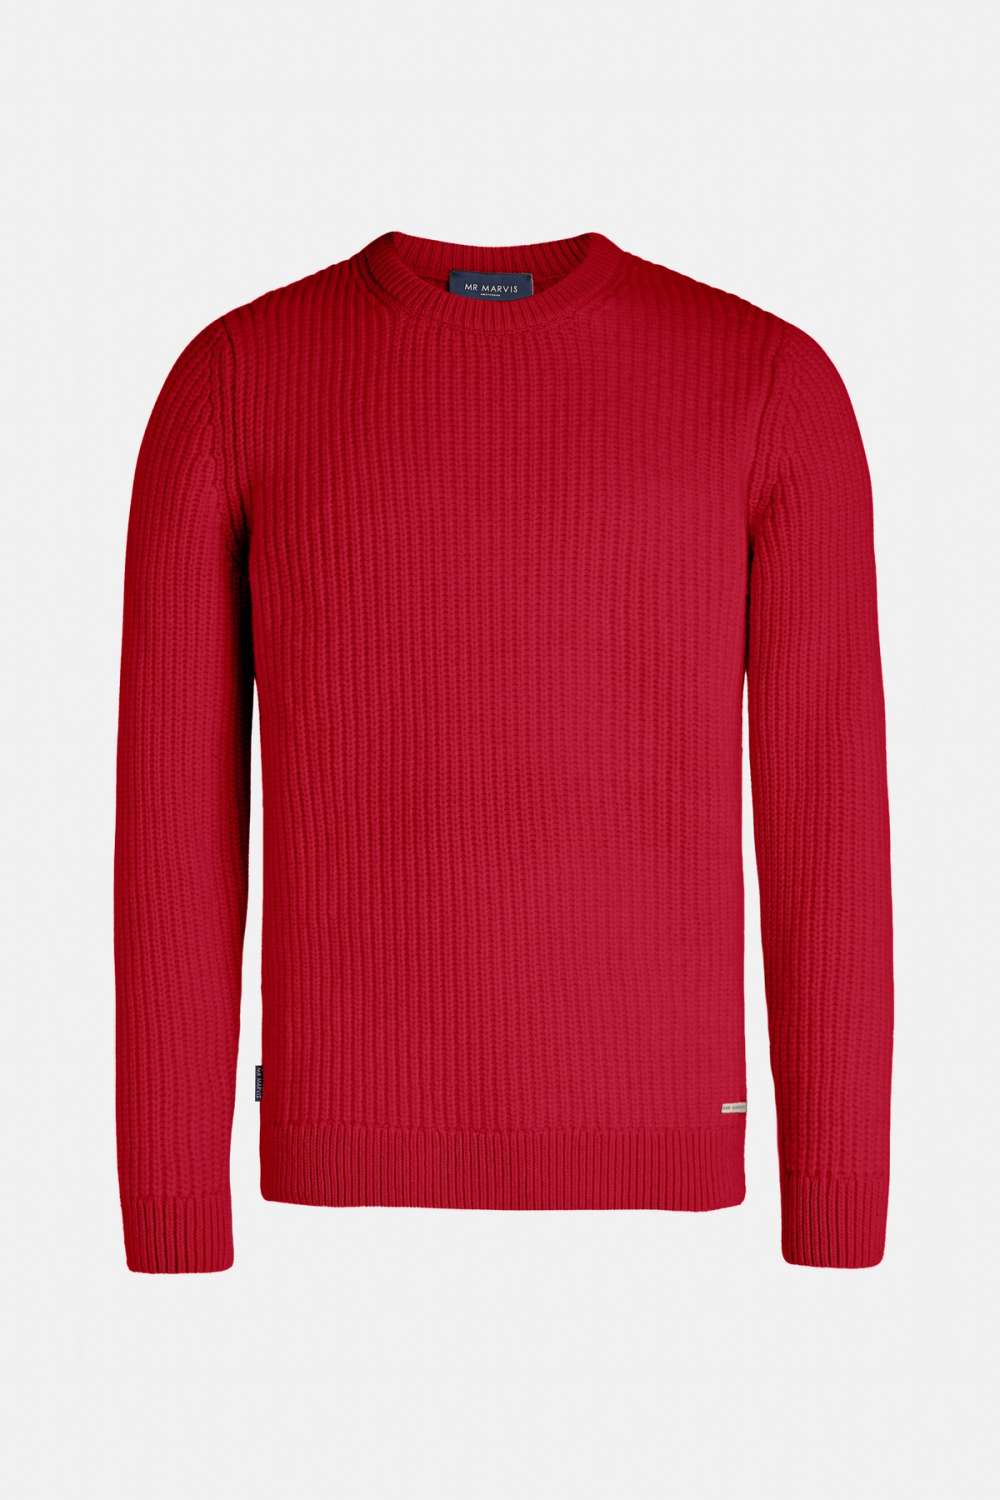 Chillies - The Knit Pullover